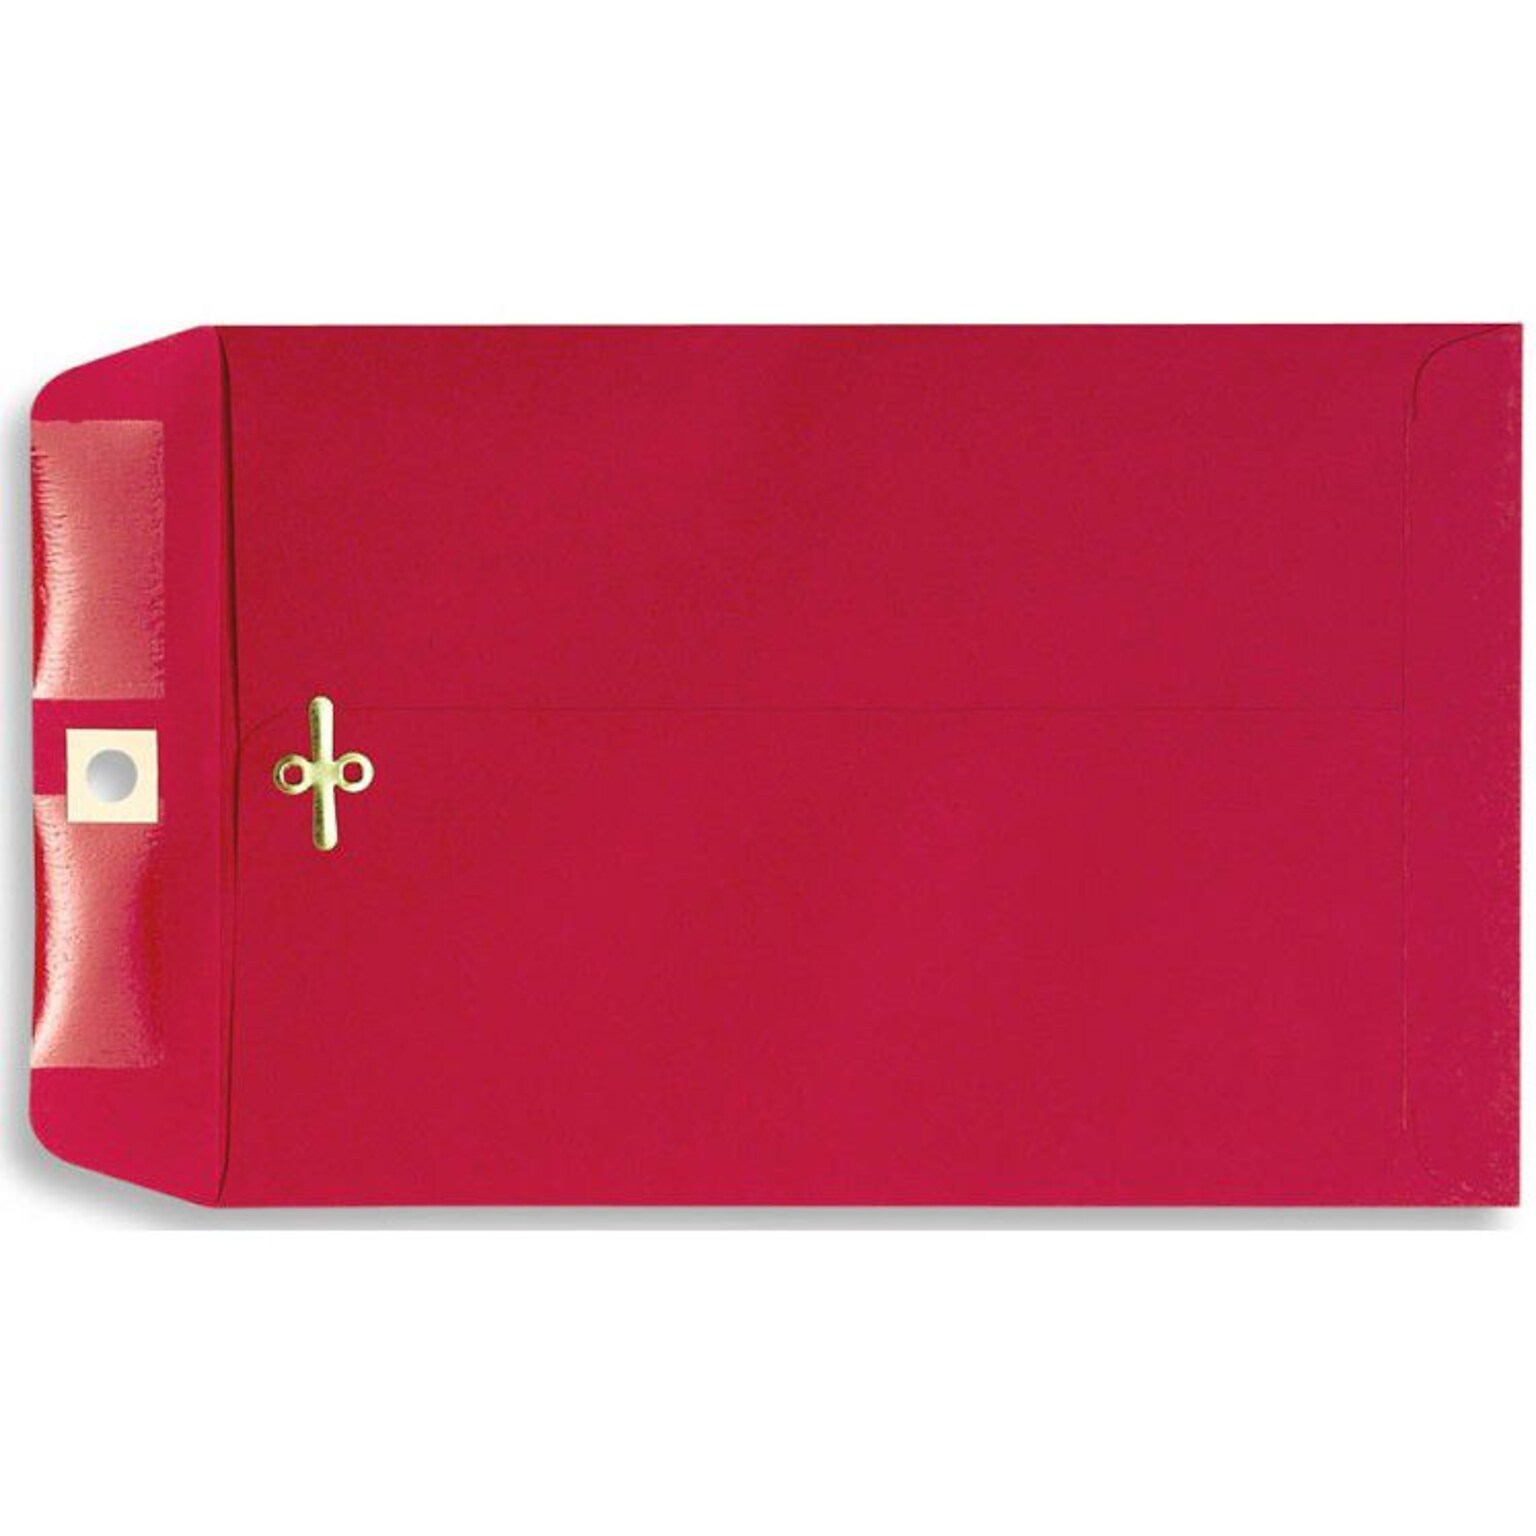 Lux® 10 x 13 Open End Clasp Envelopes; Holiday Red, 100/Pk